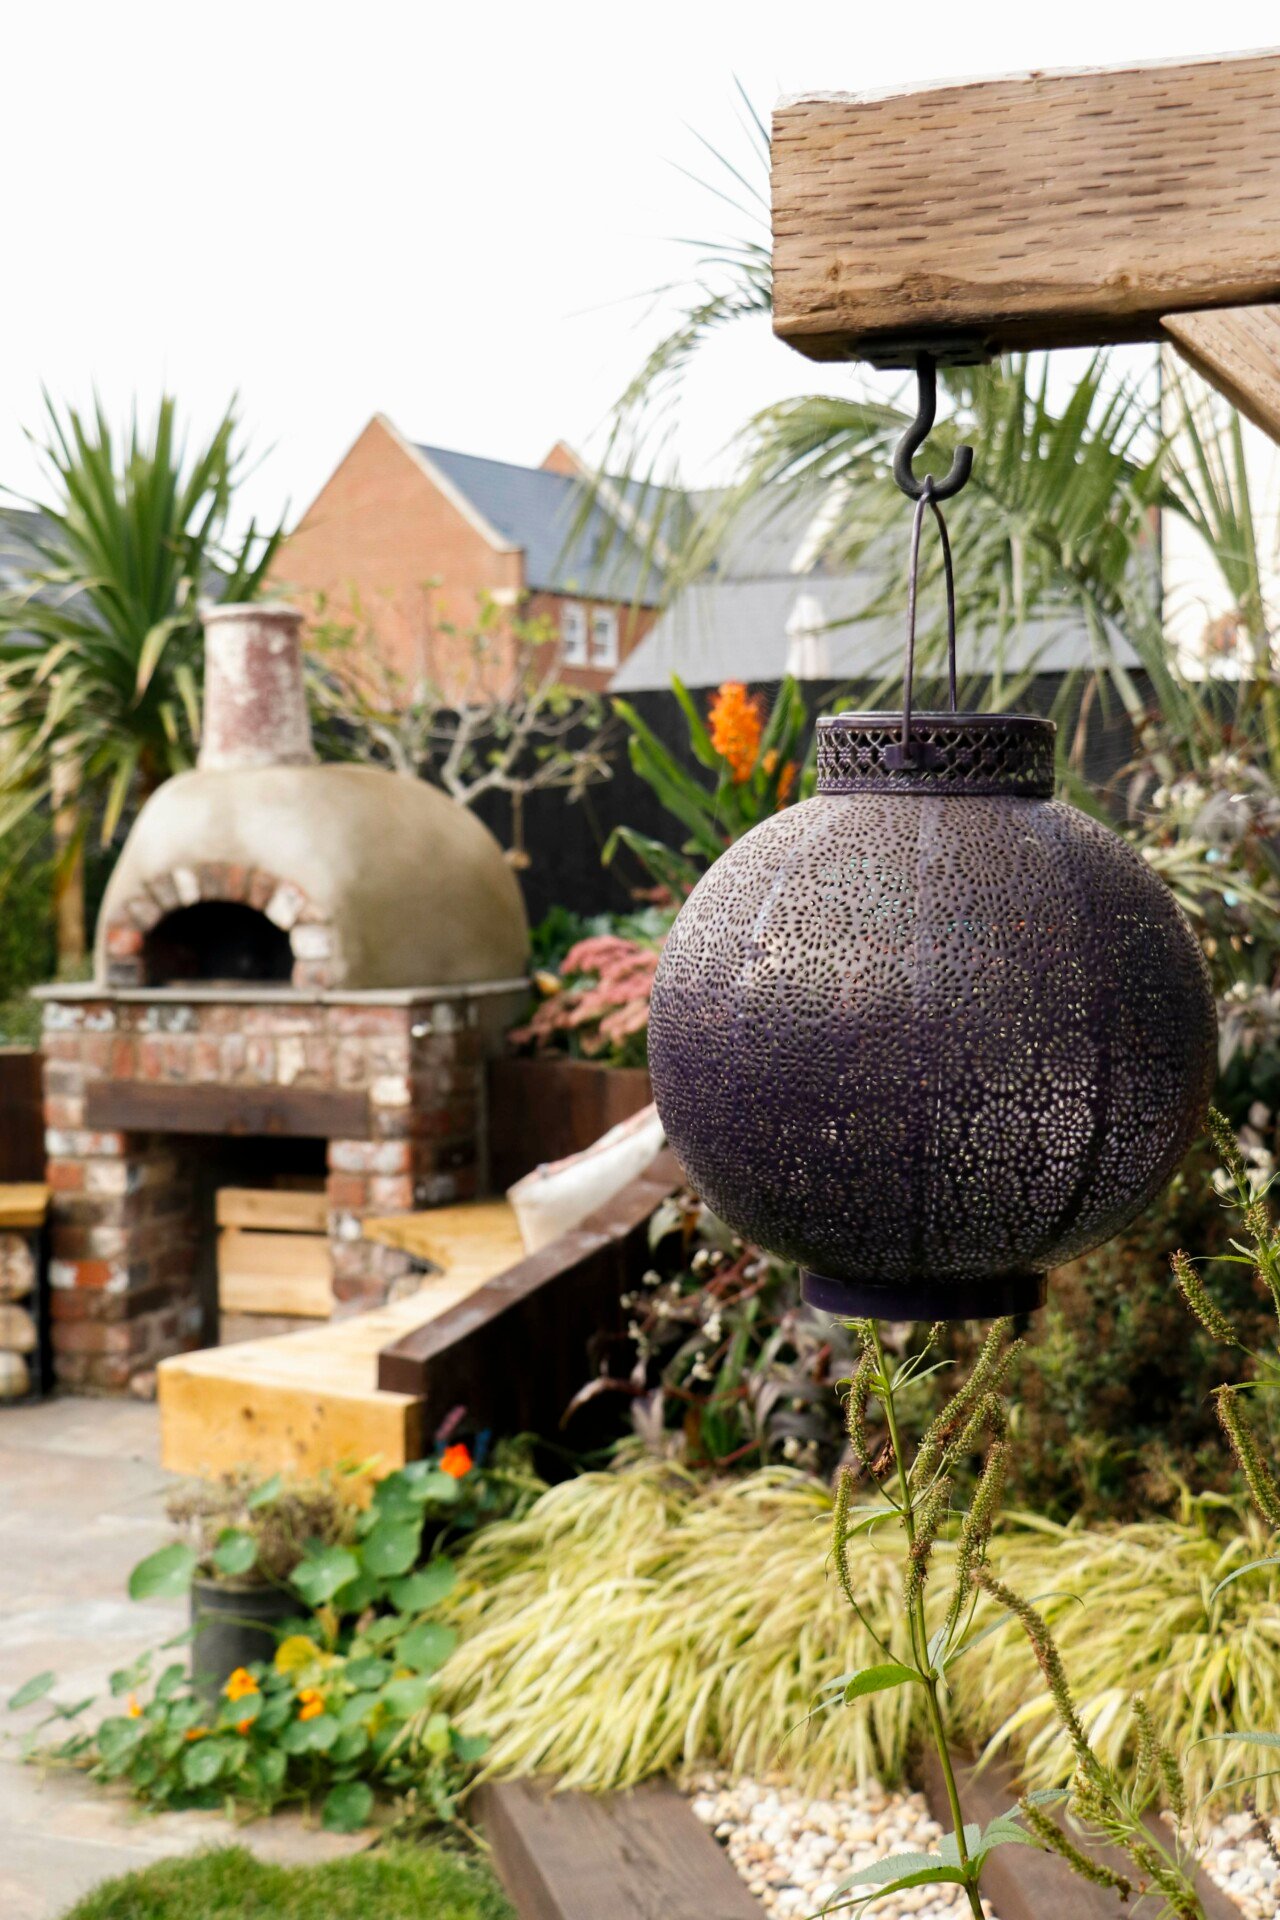 Hanging ornament in garden, with a brick pizza oven visible in background